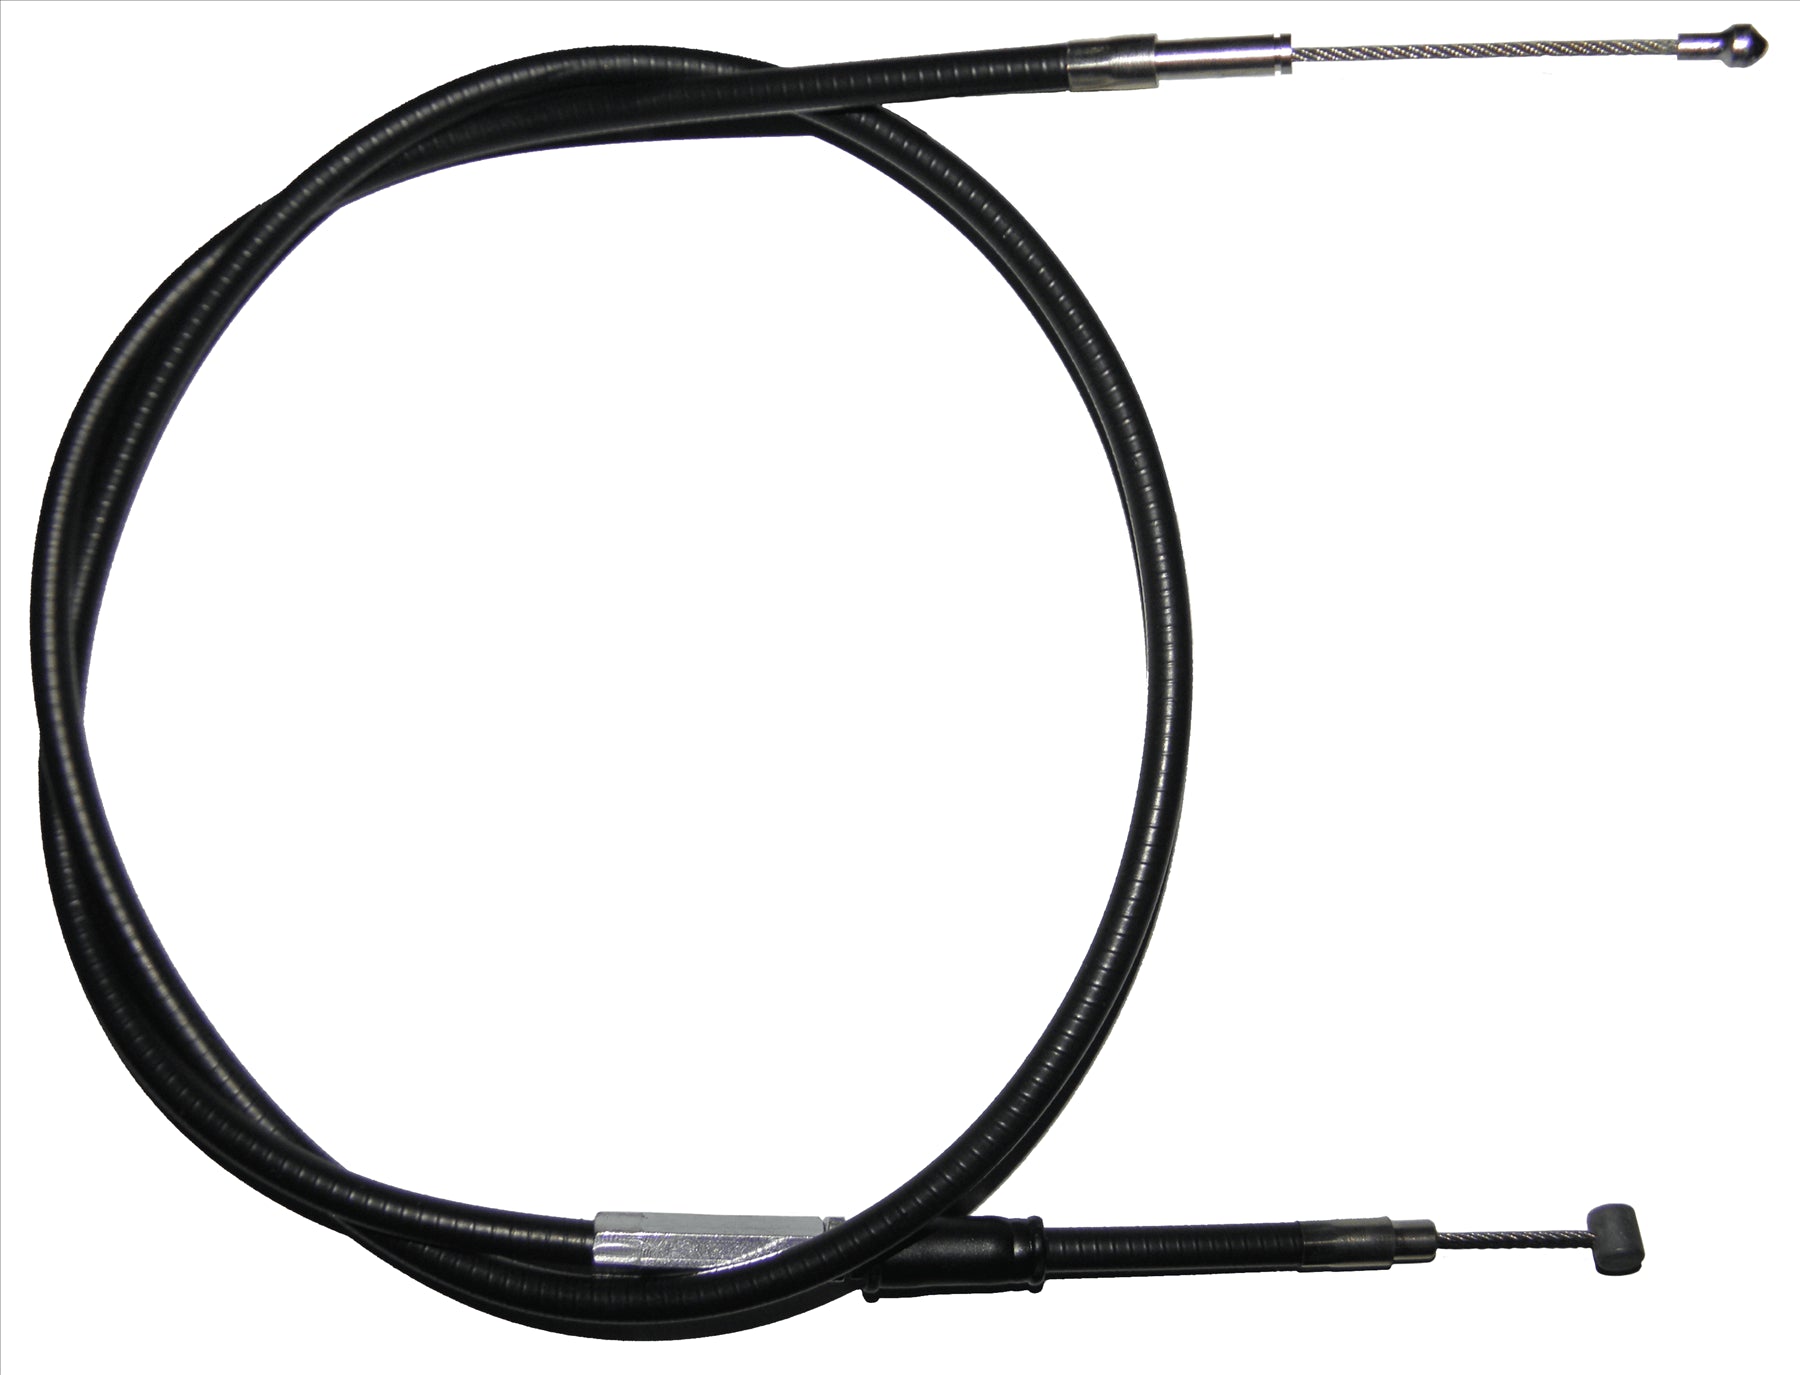 Apico Black Clutch Cable For KTM EGS 400 1996-1997